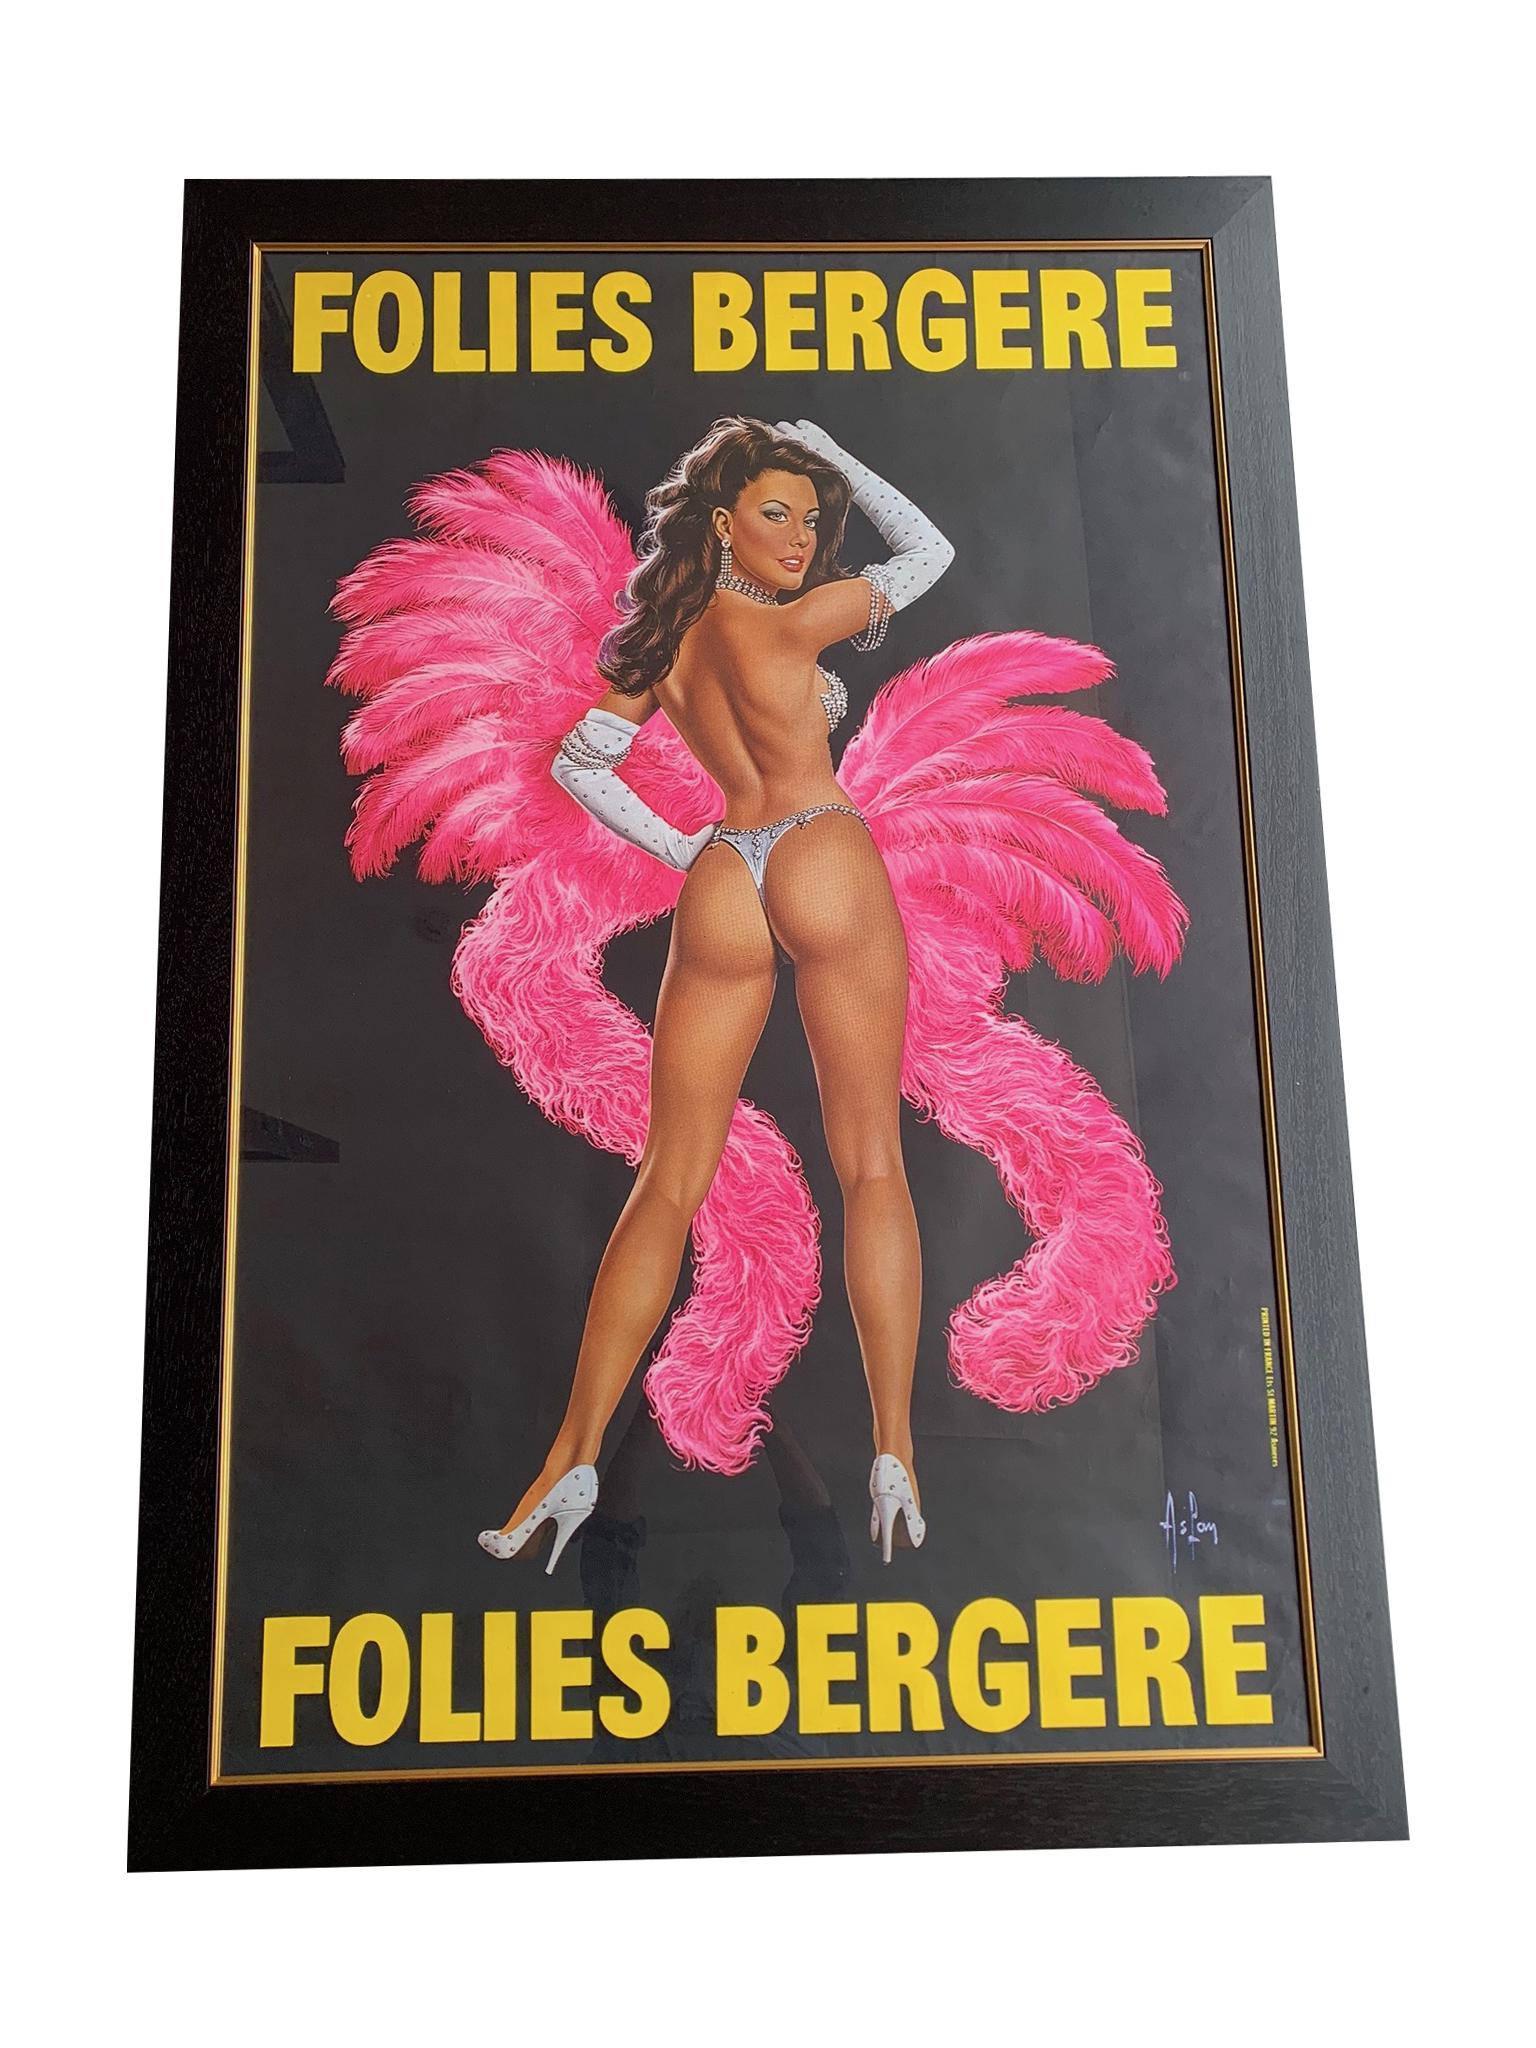 A fabulous original 1950s large Folies Bergere poster by artist Alain Gourdon Aka AsLan. It depicts a semi clad showgirl with fuchsia pink boa and feathers. Signed in the print 